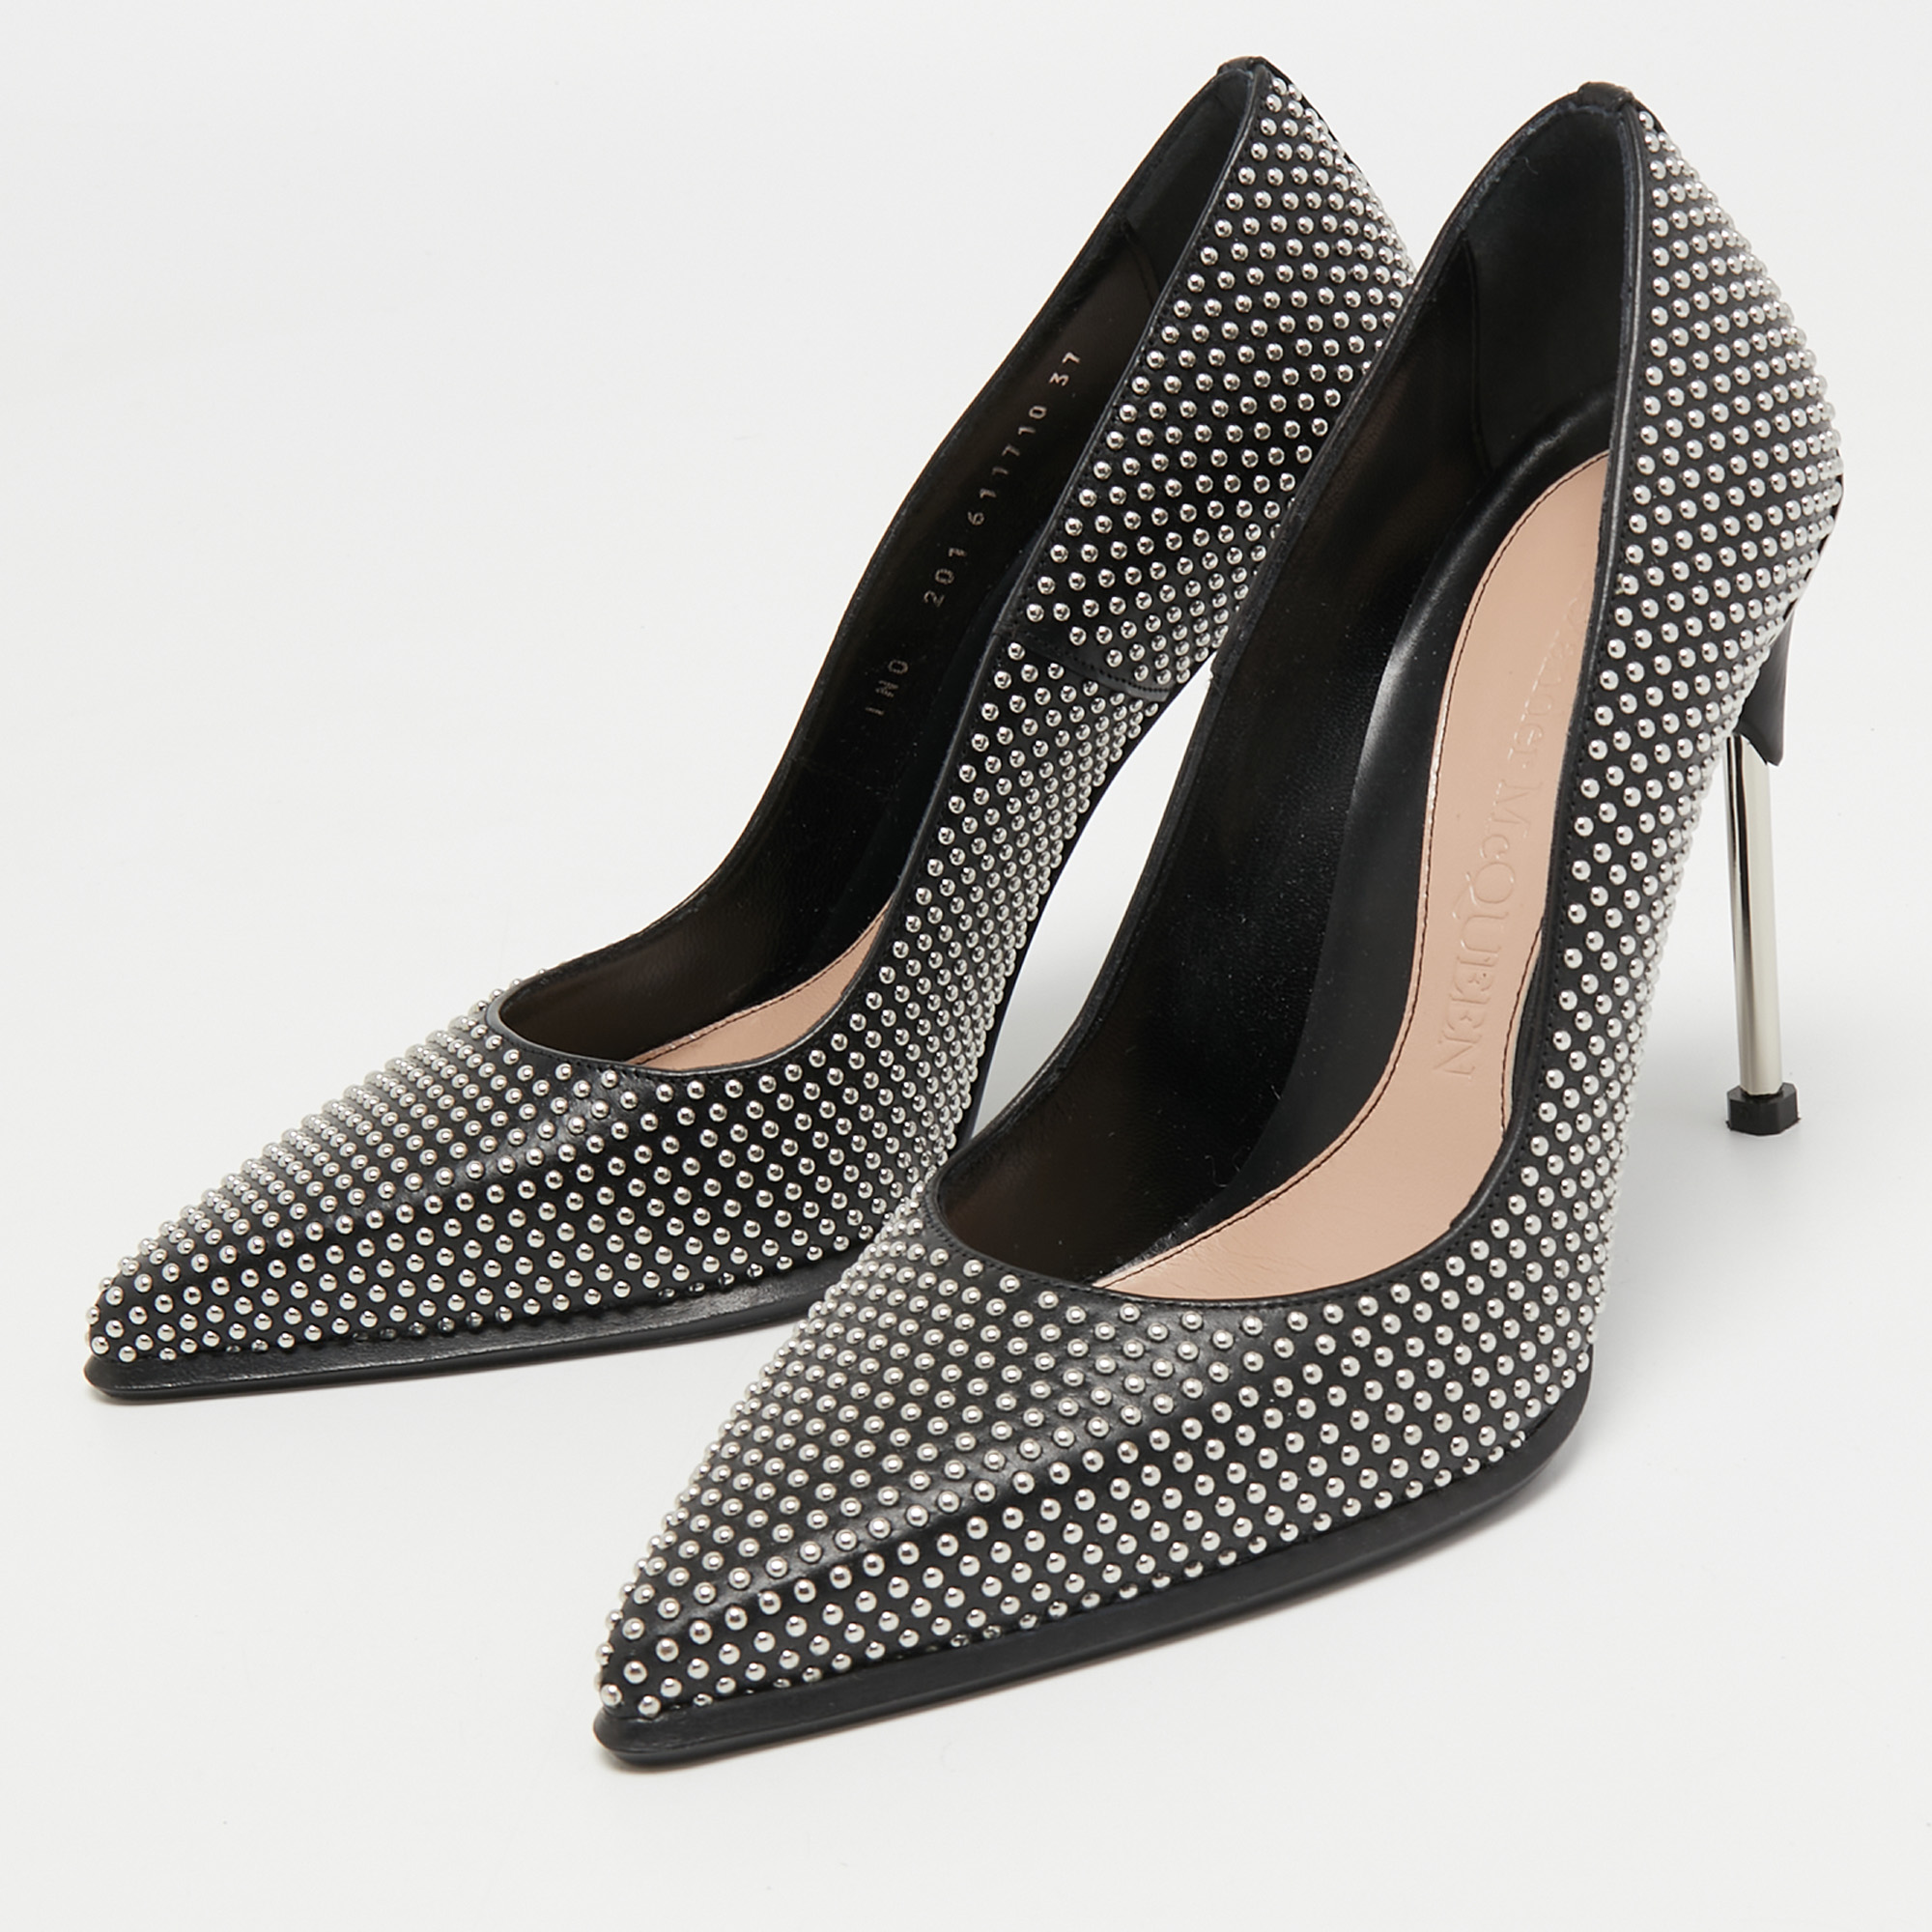 

Alexander McQueen Black Leather Studded Pumps Size